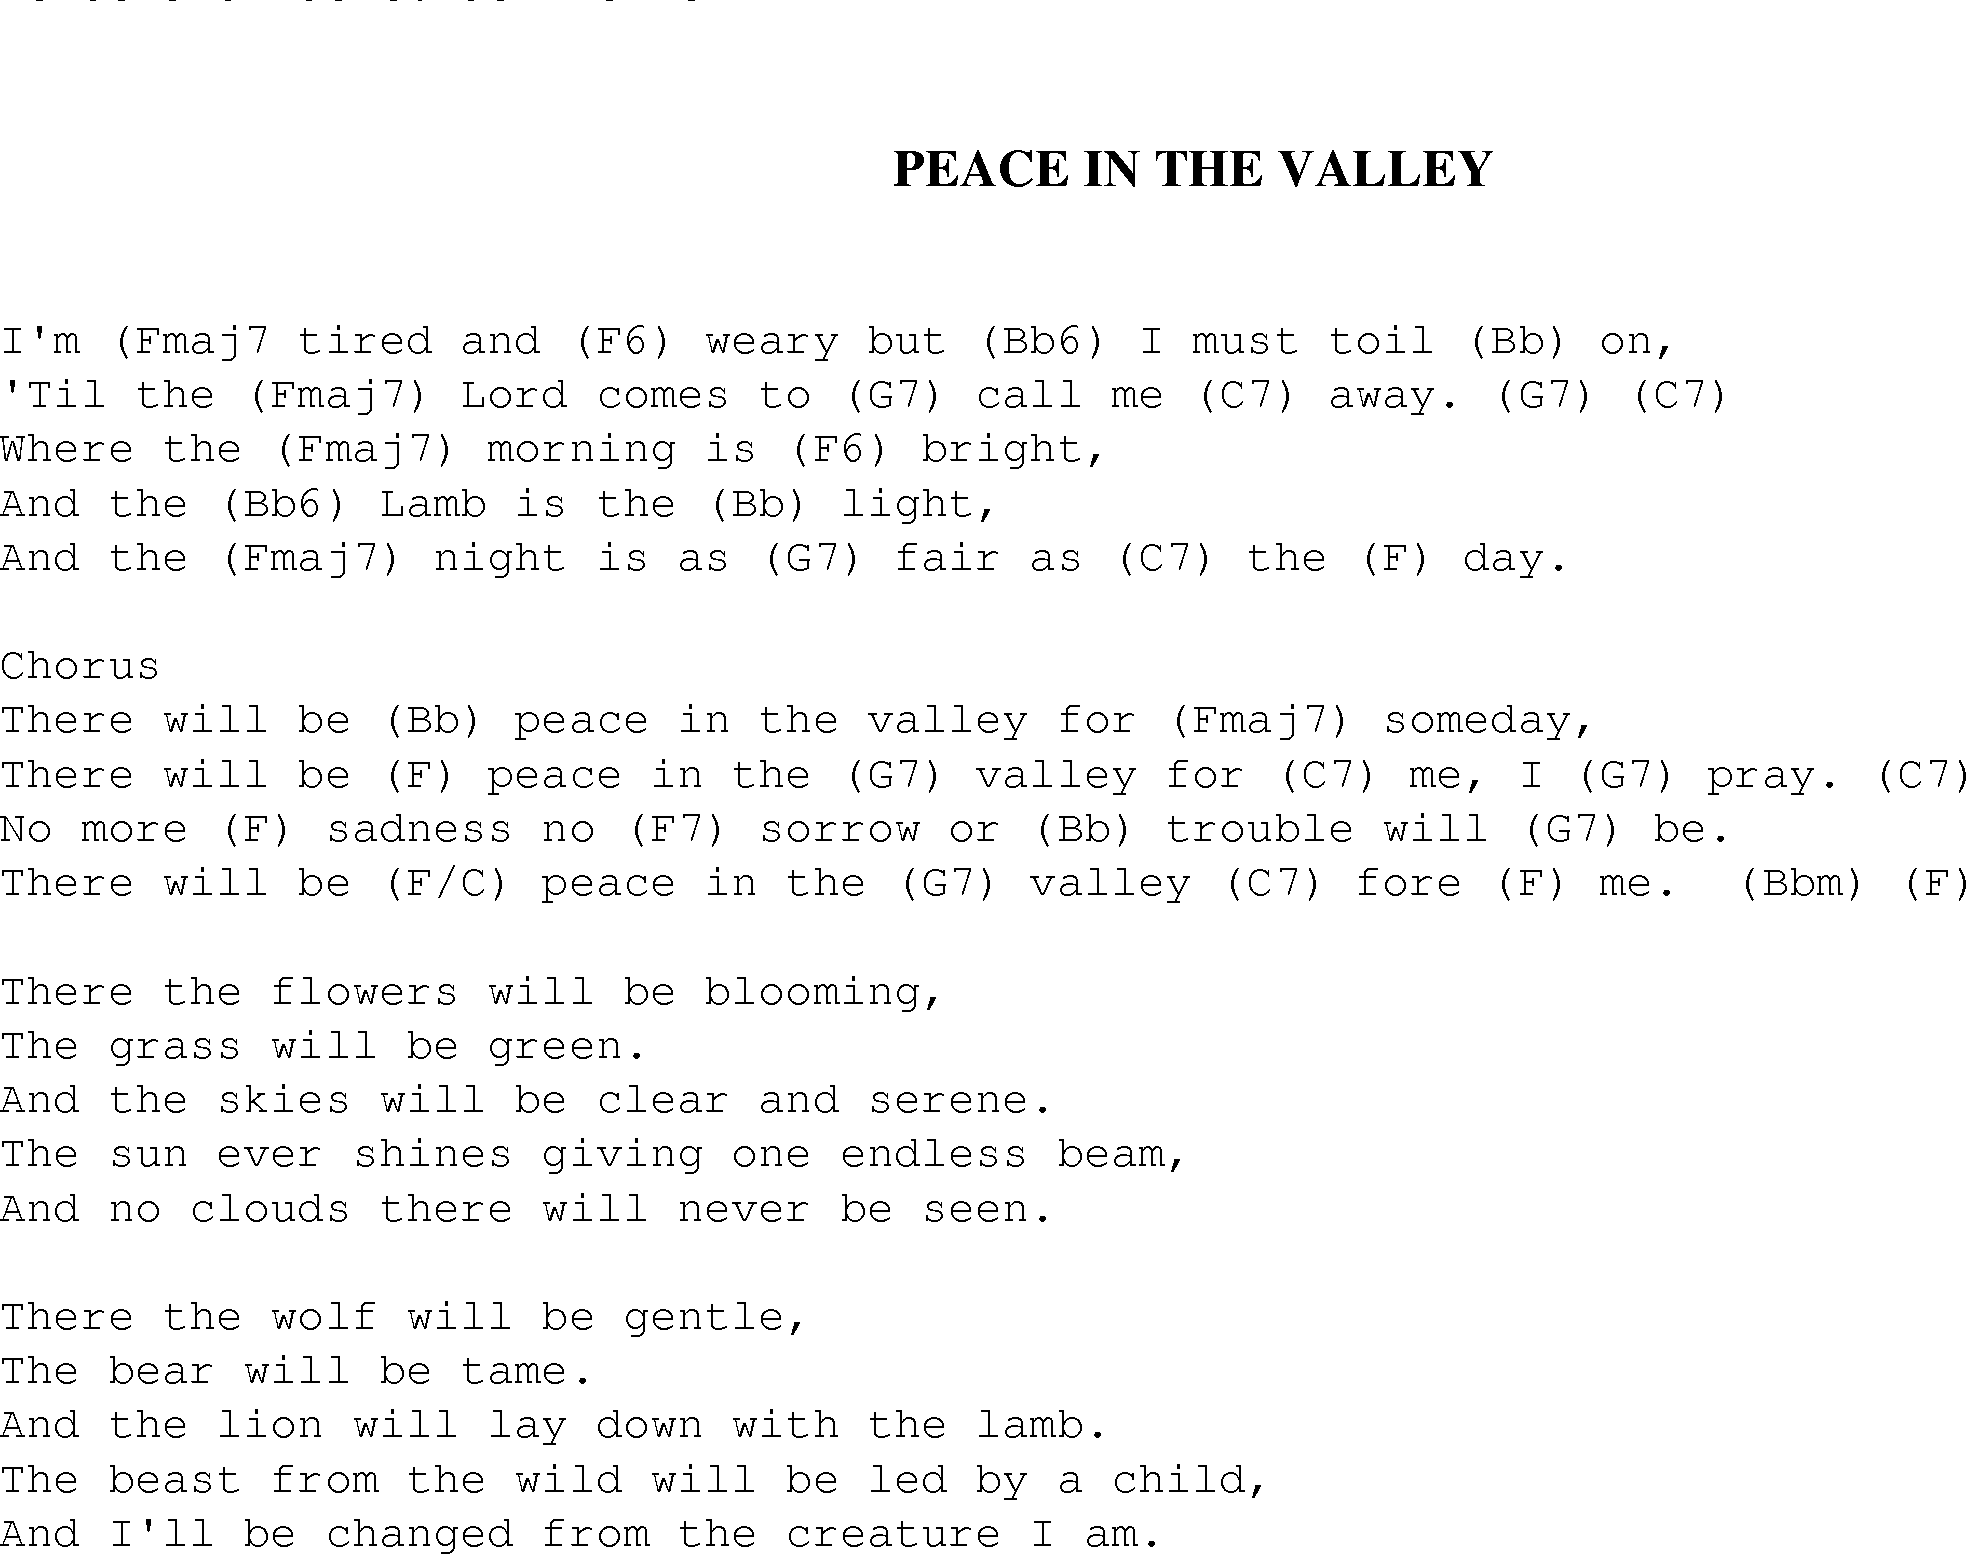 Gospel Song: peace_in_the_valley, lyrics and chords.